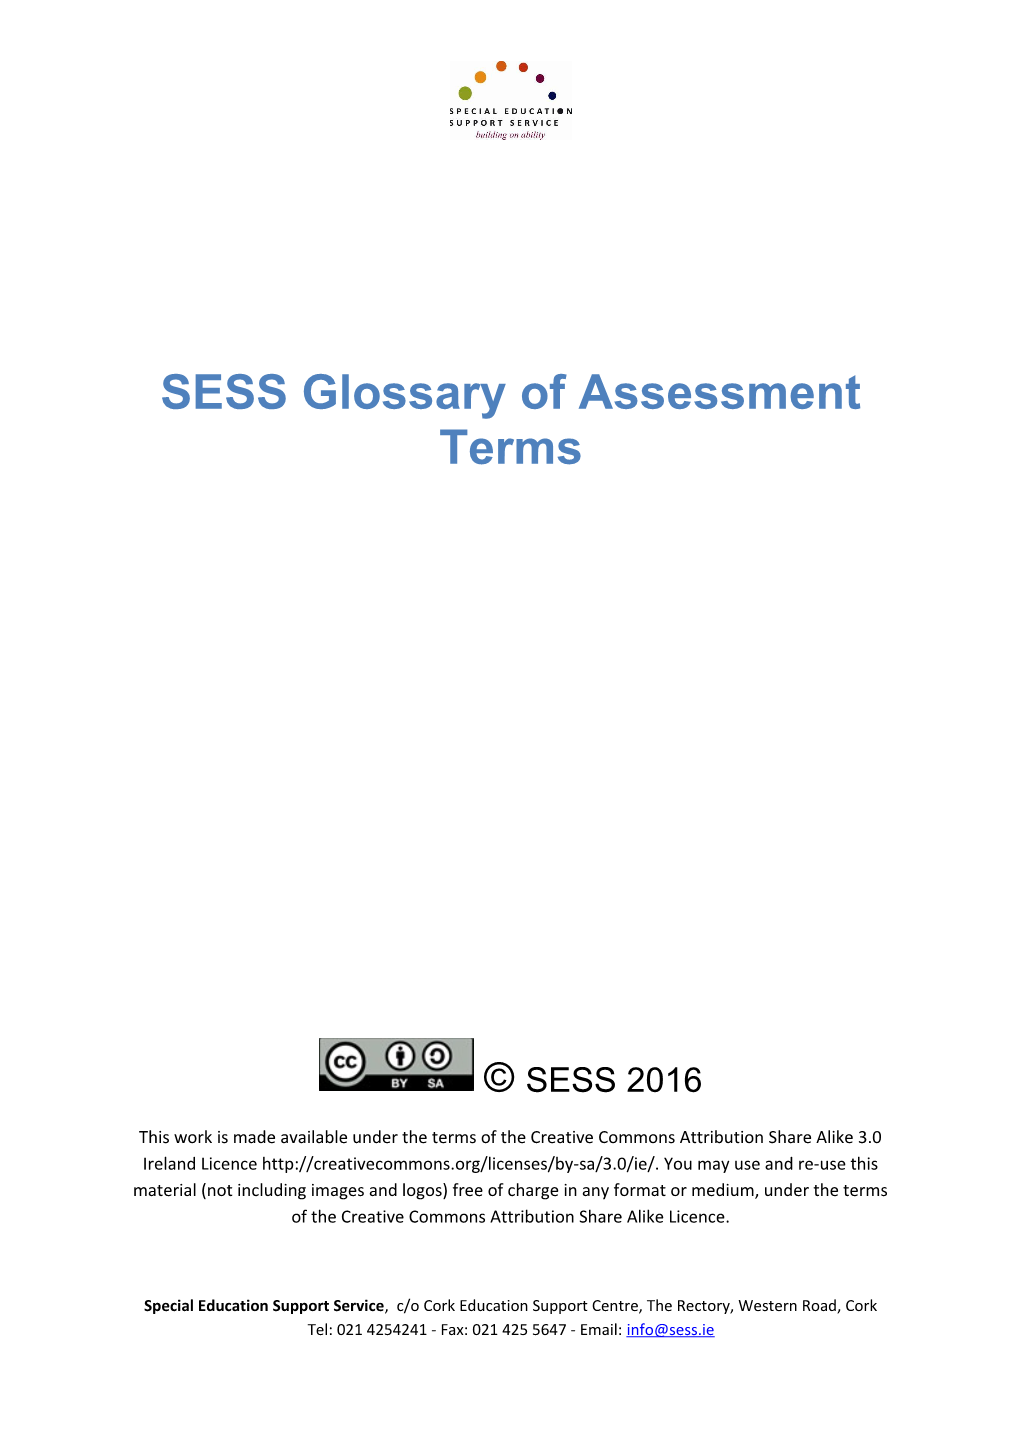 SESS Glossary of Assessment Terms